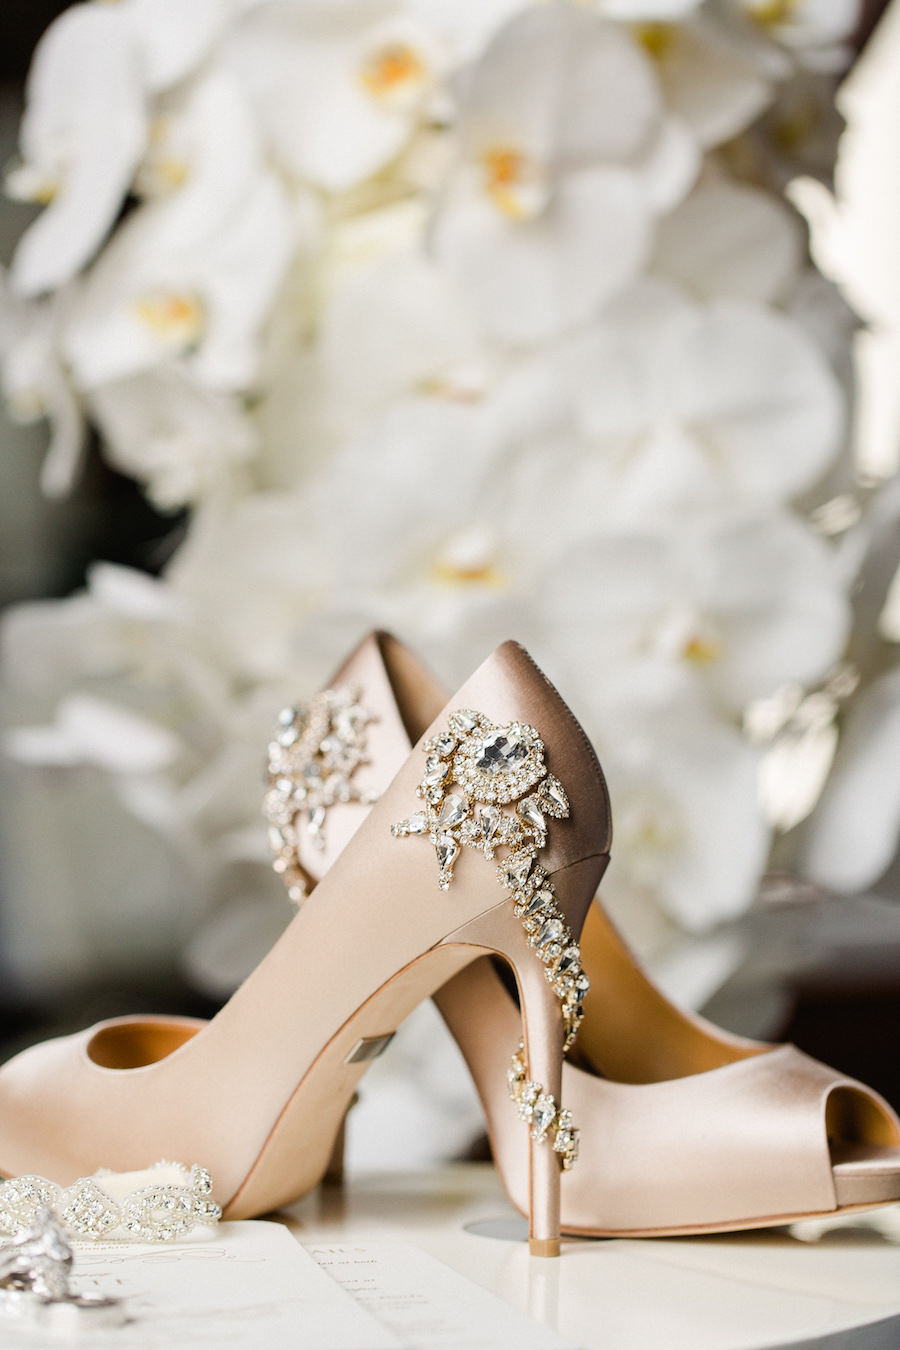 Nude, Badgley Mischka Royal Evening Pumps Wedding Shoes with Crystal Heel Embellishments Snaking Around The Heel to the Back | Tampa Wedding Photographer Ailyn La Torre Photography